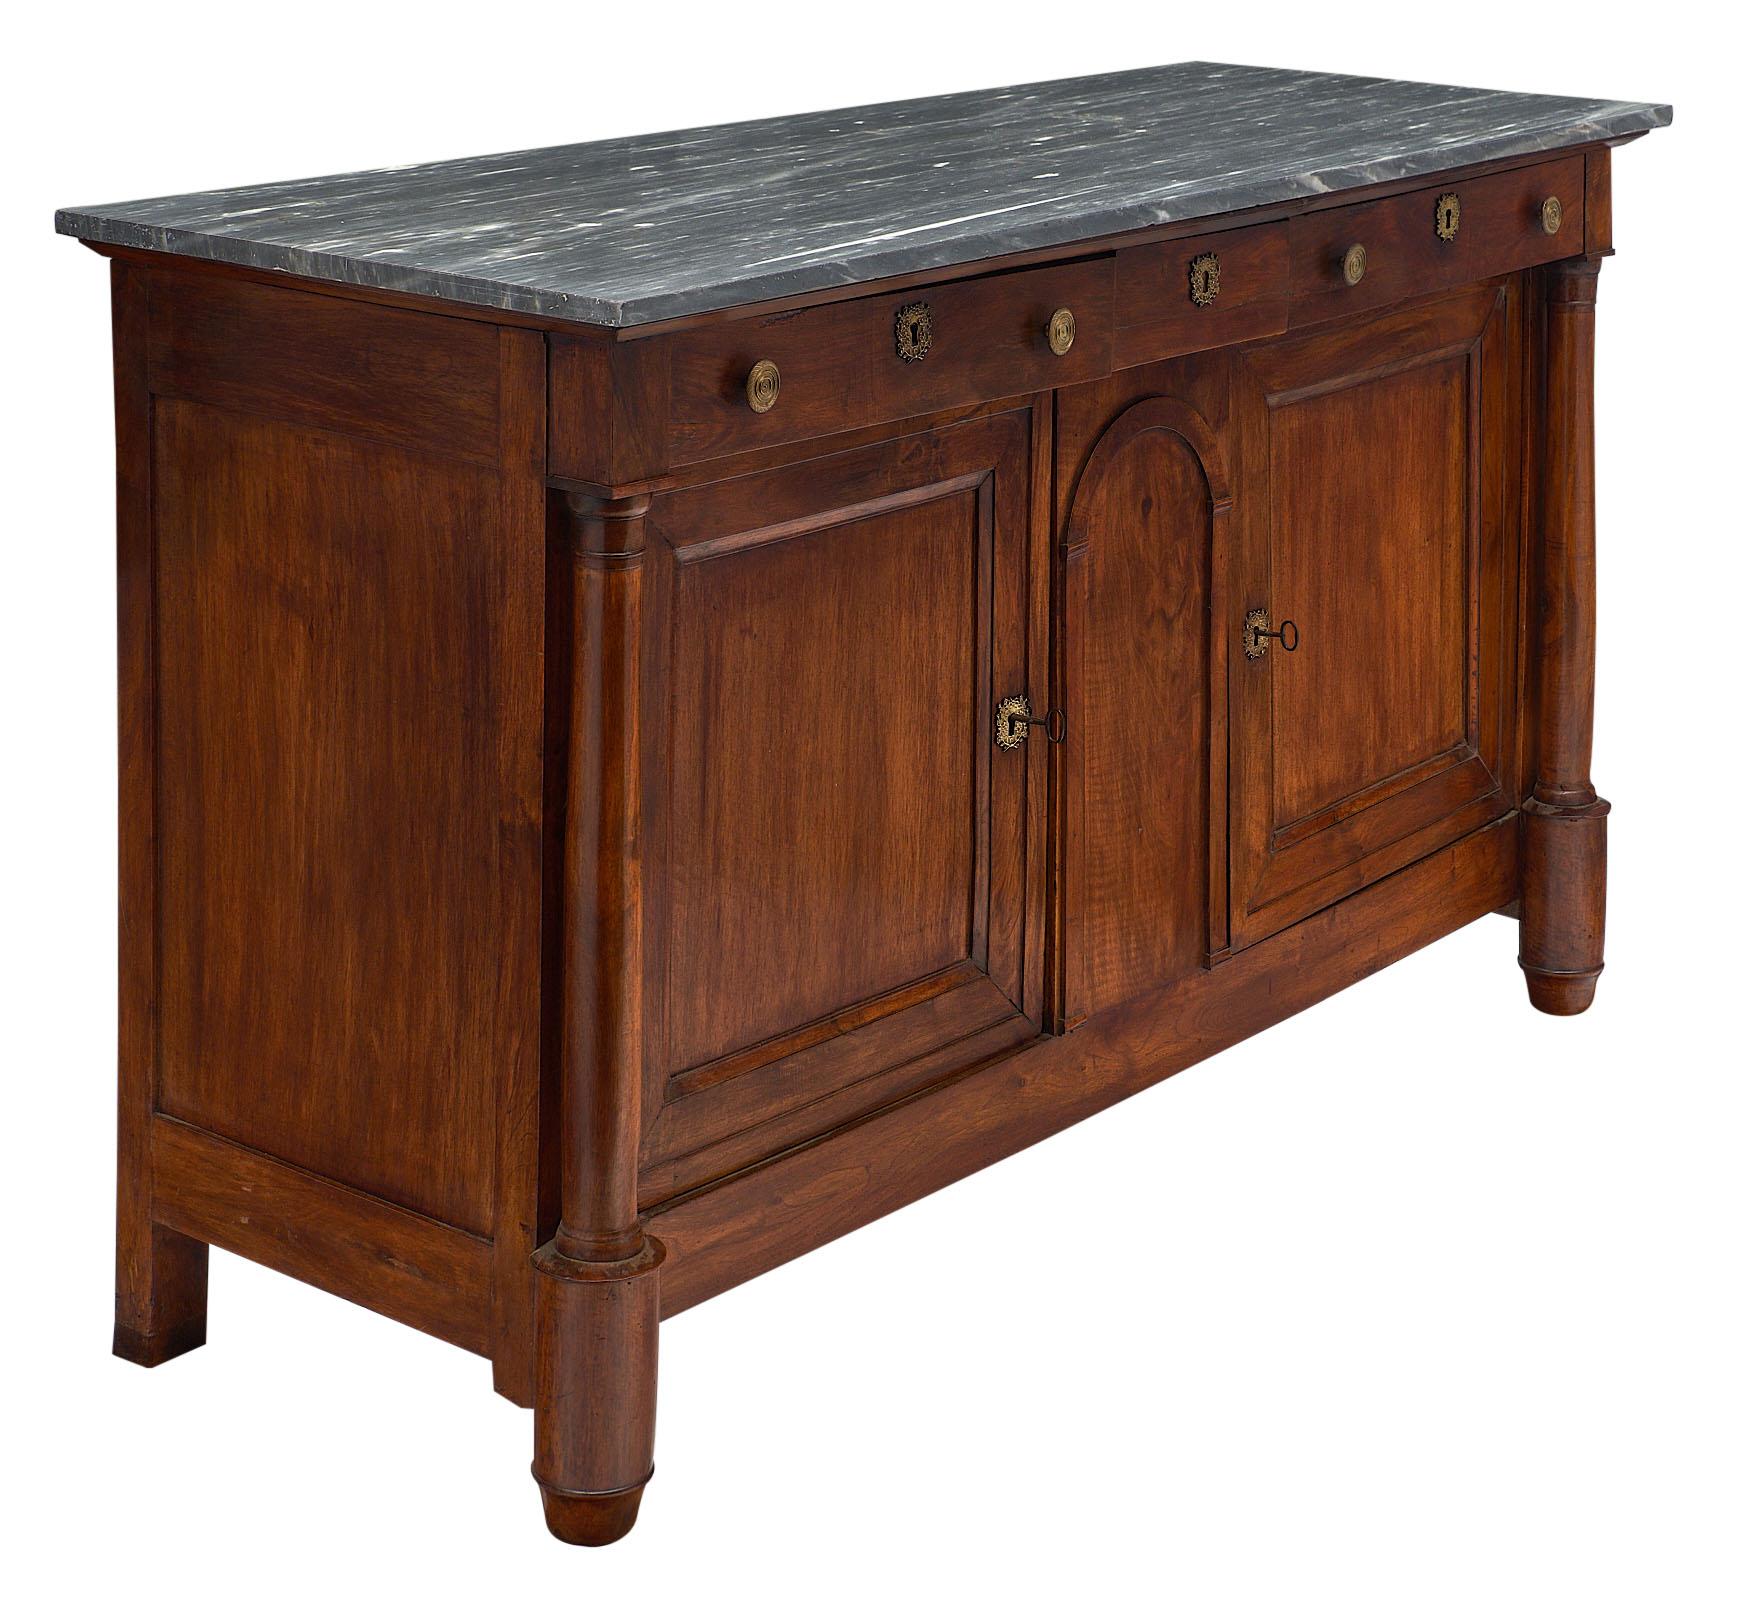 Empire period “grand buffet” of solid walnut, waxed and patinated. Fully restored, this important credenza features two doors, three dovetailed drawers and a “Turquin” marble top. We loved the fine craftsmanship, detached columns and original bronze